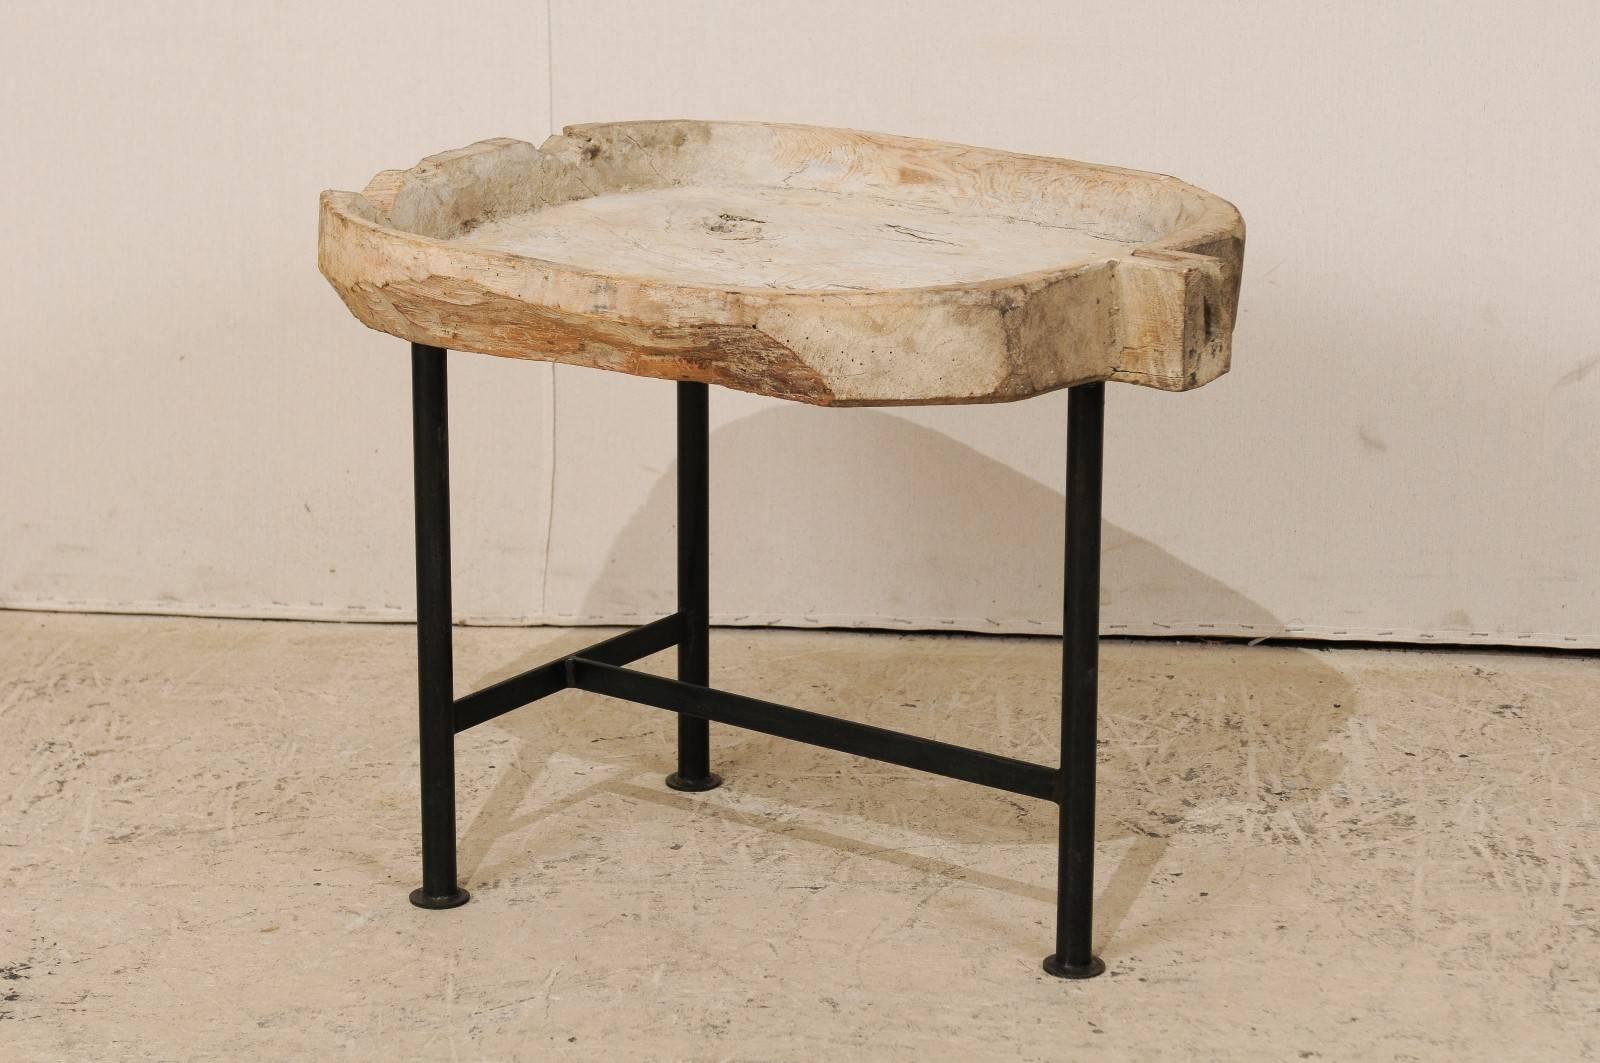 A Spanish wood trough coffee table. This unique coffee table features a top made from a Spanish, 19th century wood trough which was likely used during the process of cheese making. The natural wood top of this table is supported by a custom metal